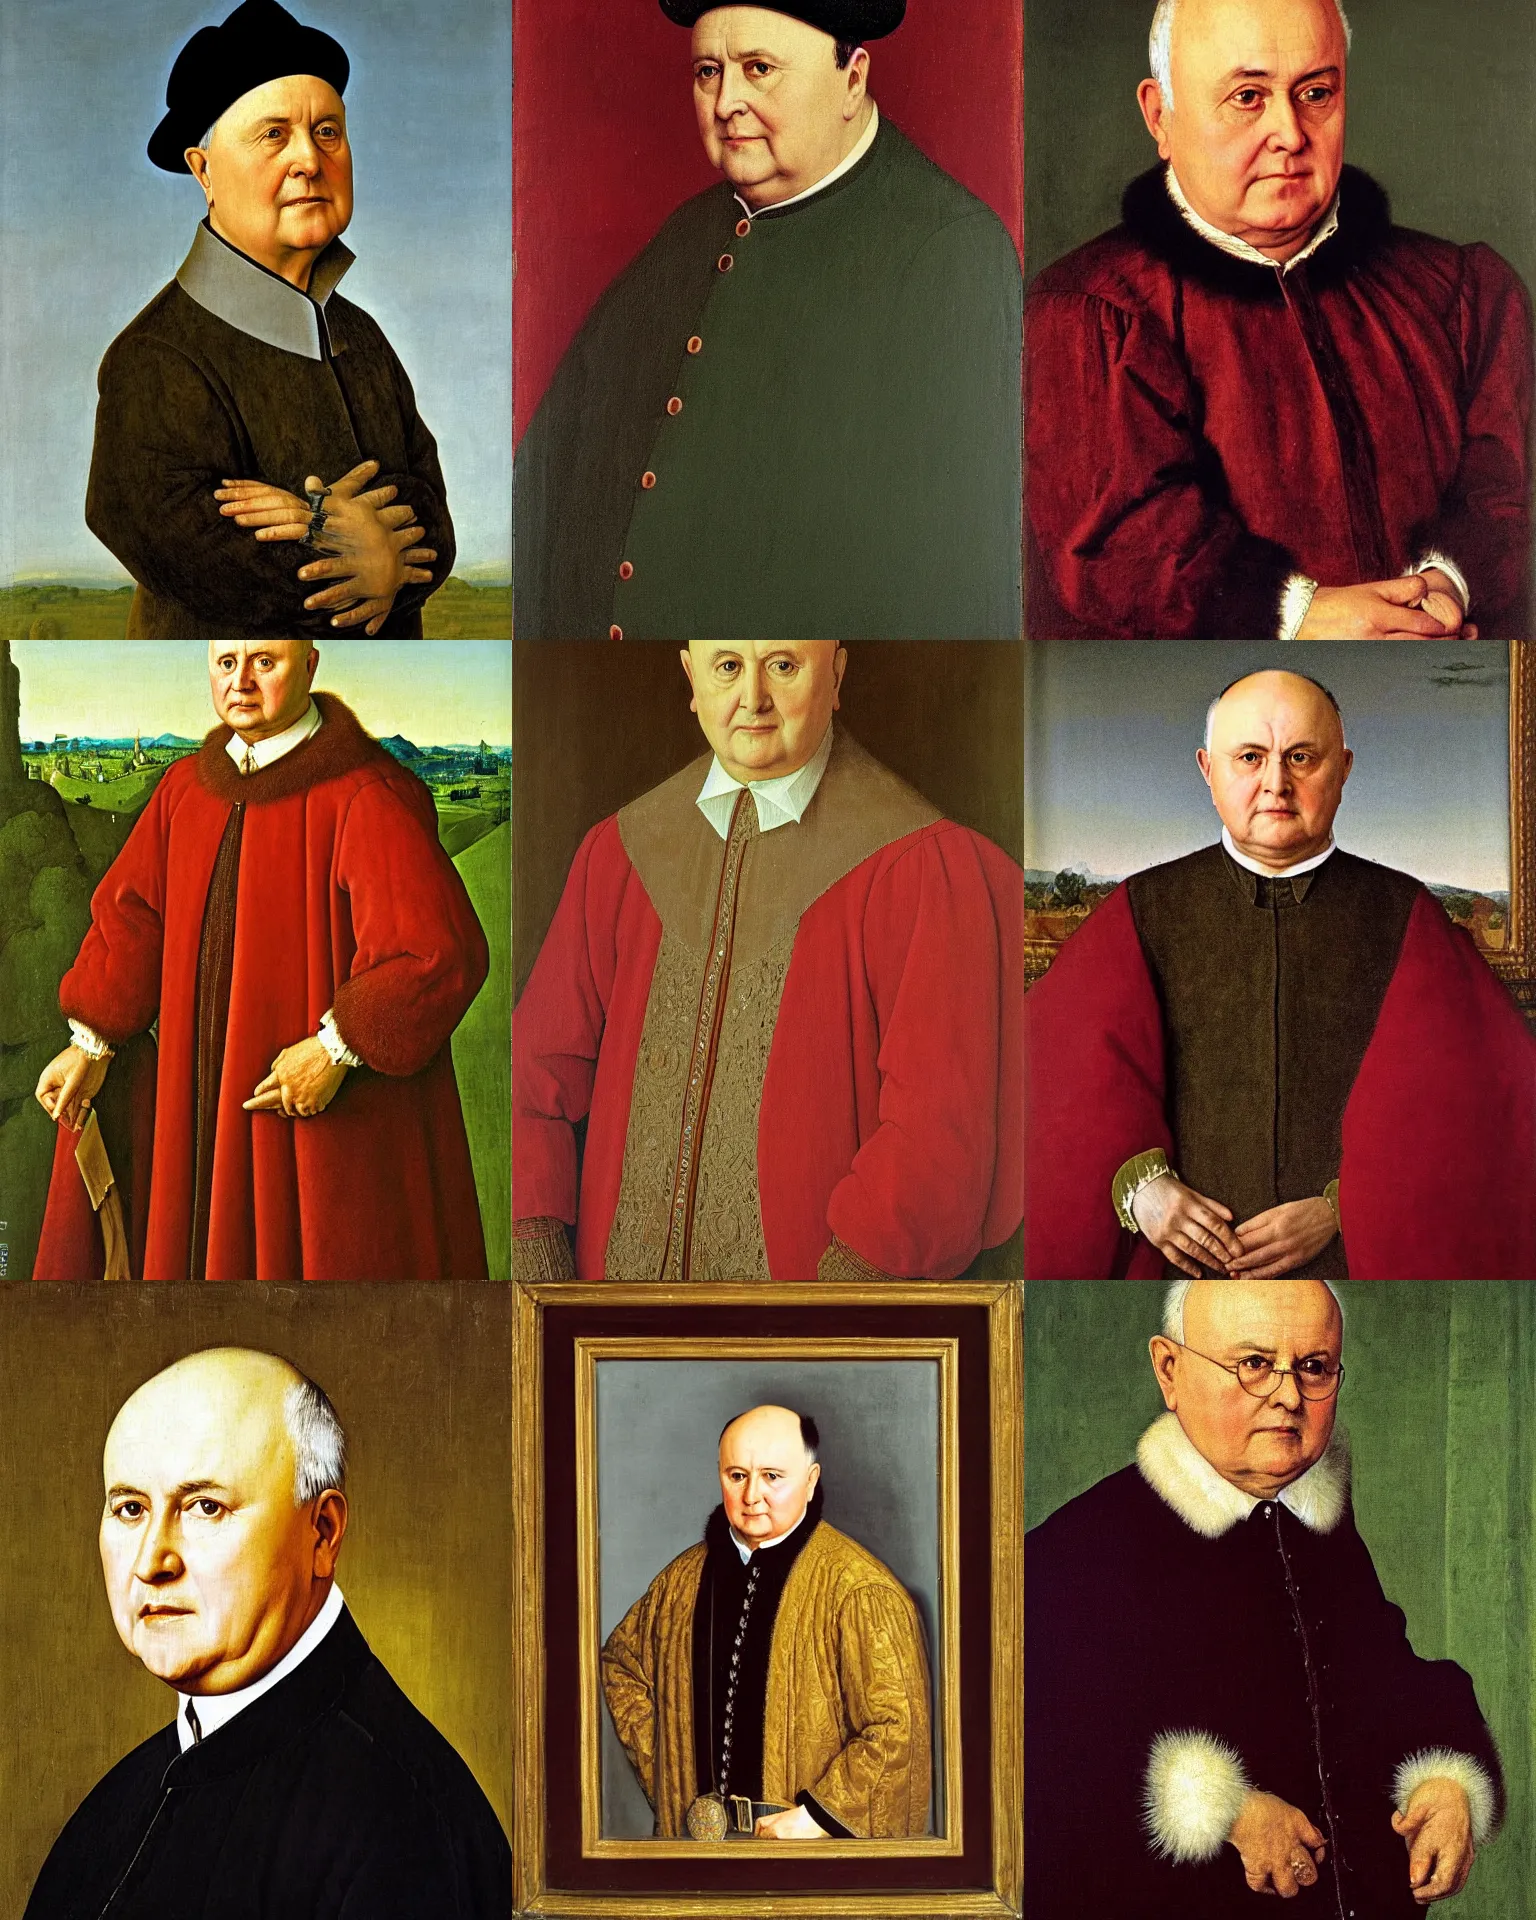 Prompt: a portrait of mikhail gorbachev painted by jan van eyck, oil painting, highly detailed